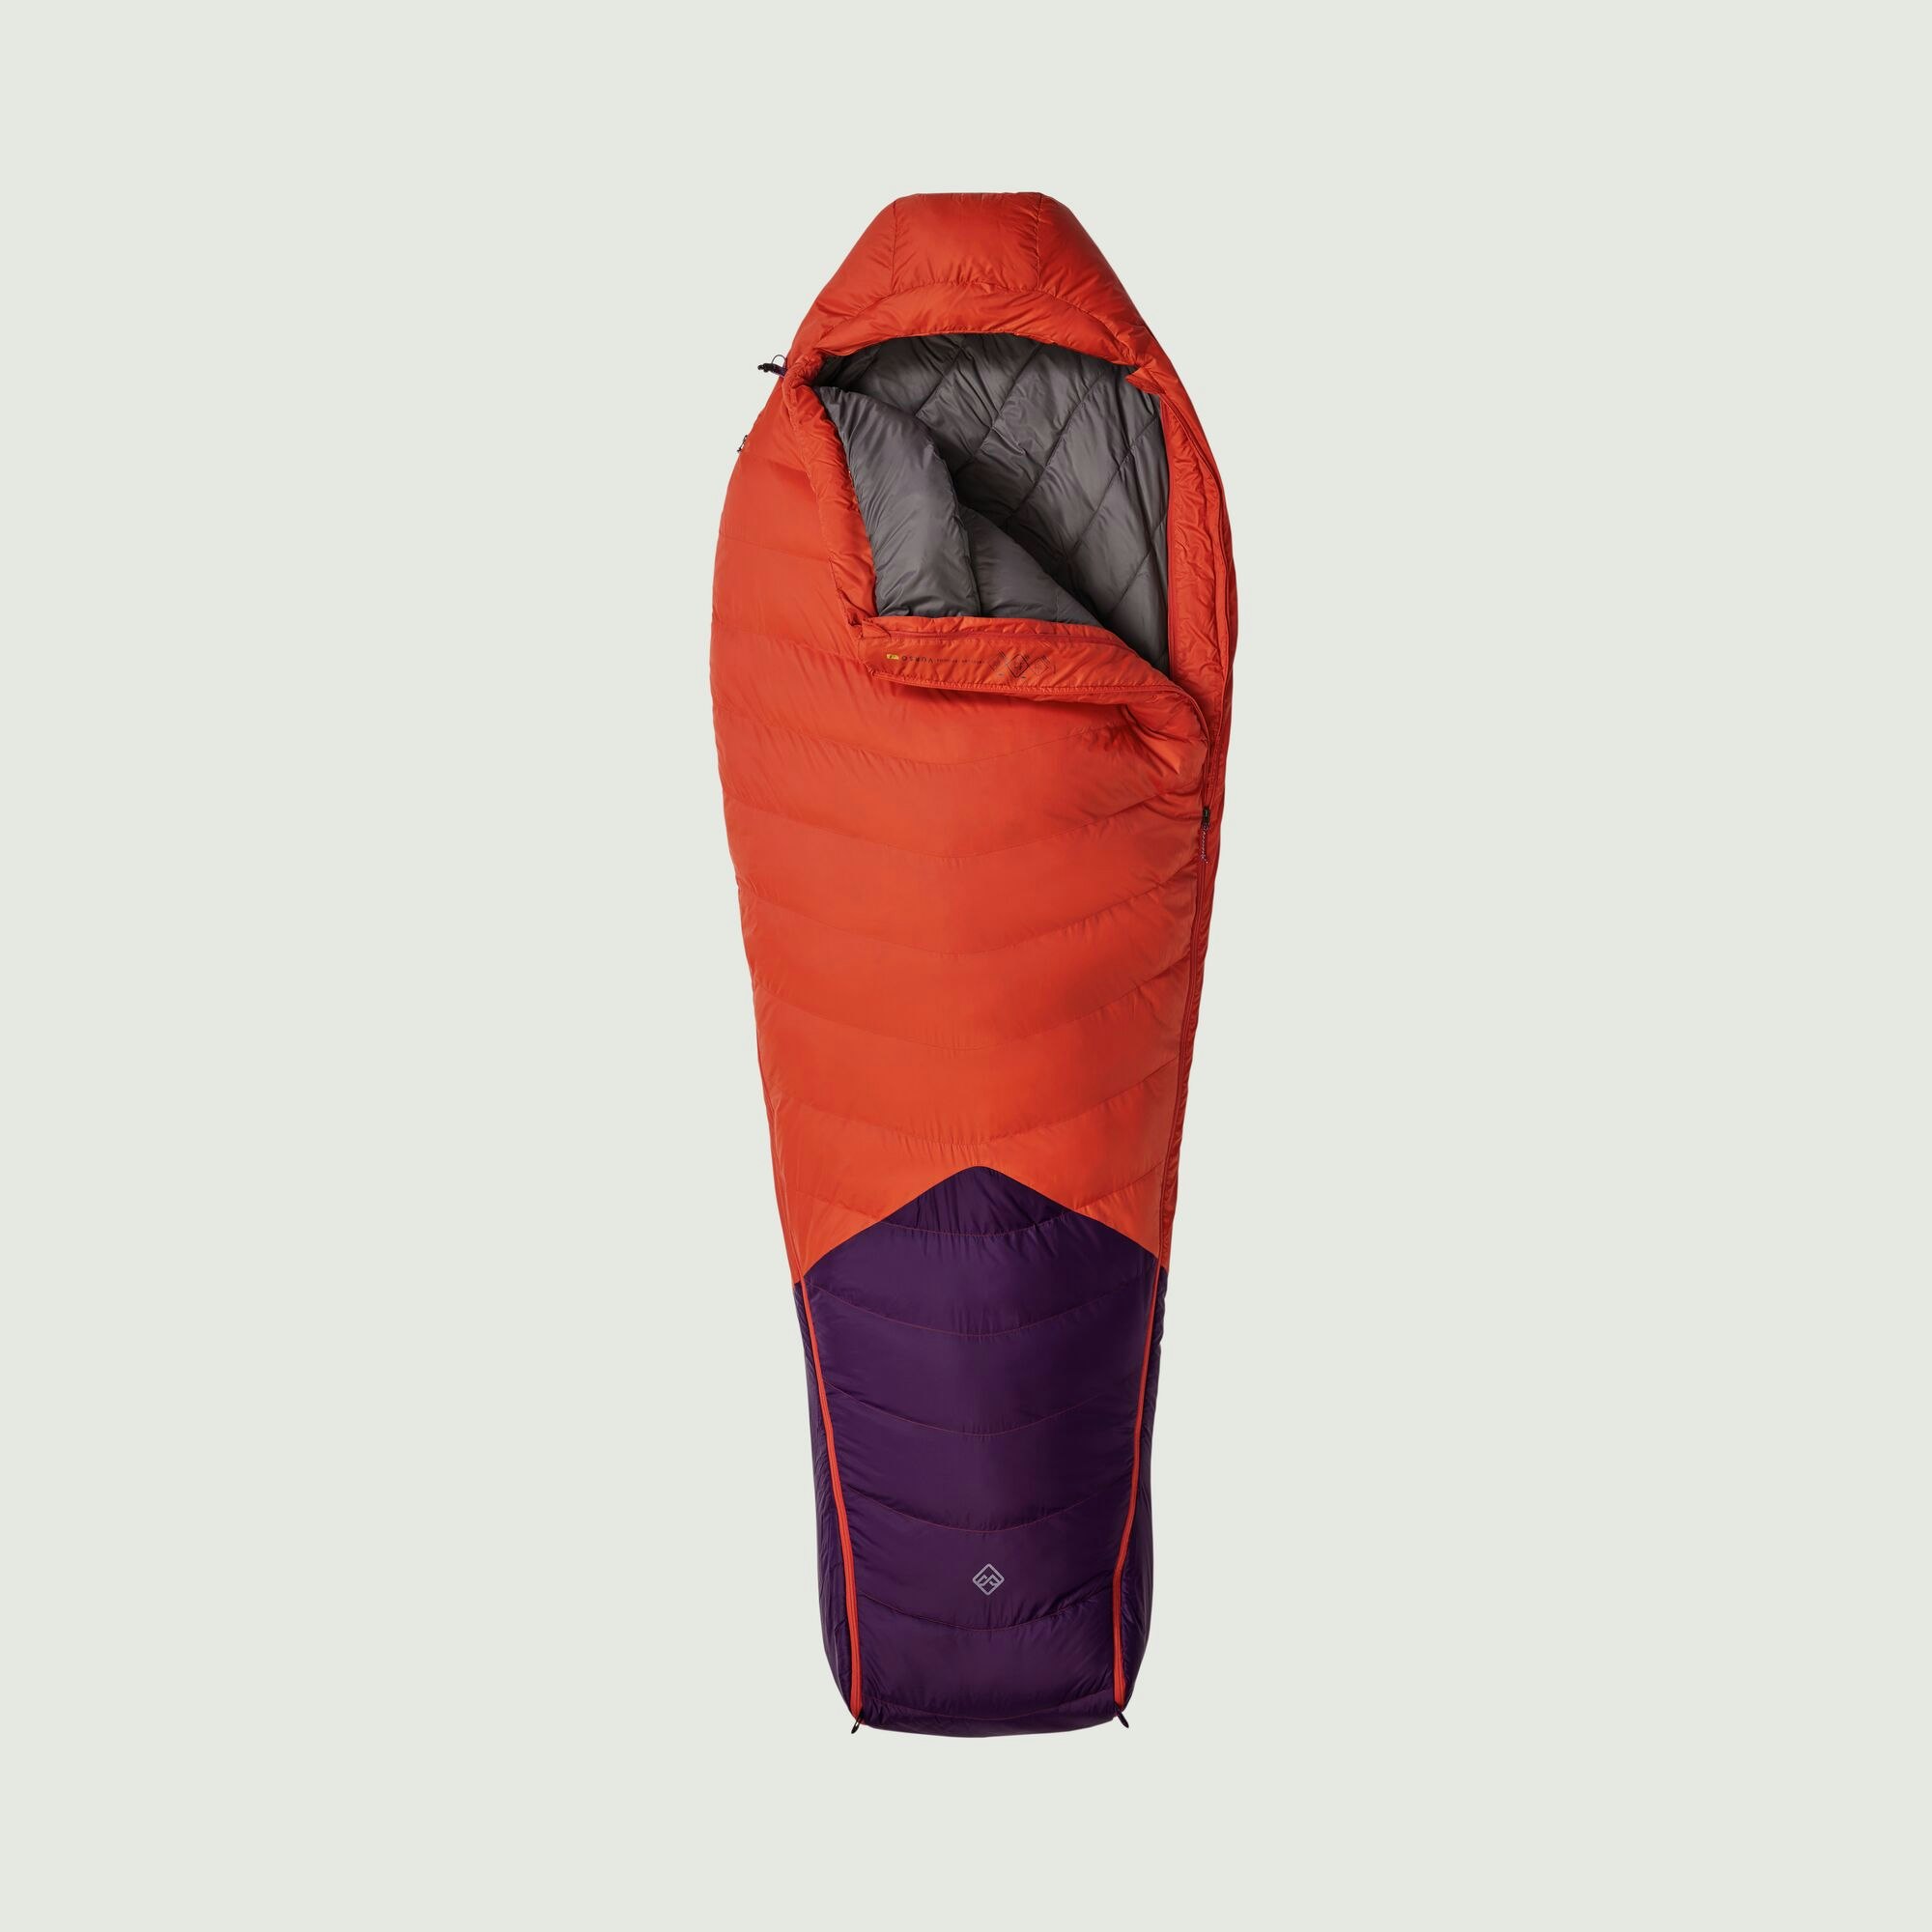 Buy Camping Gear & Hiking Equipment, Gear Clearance